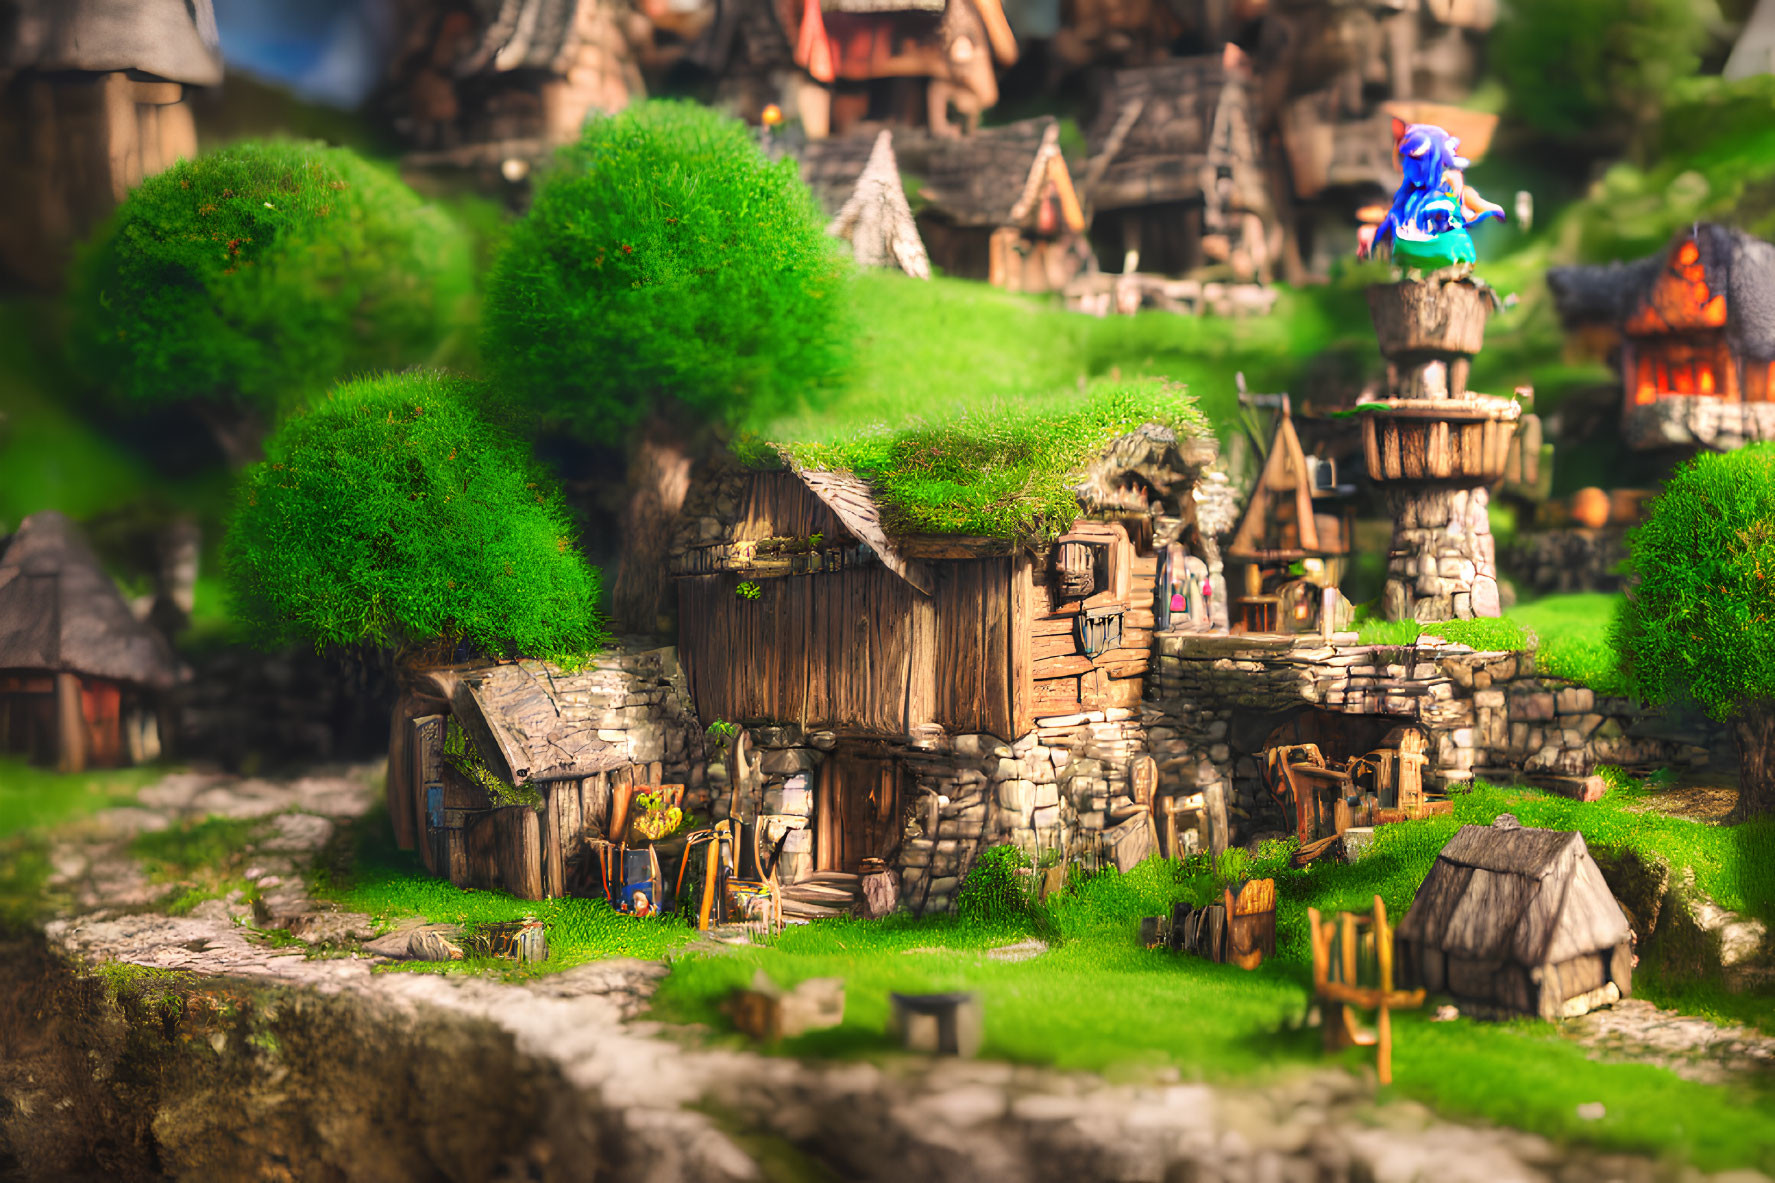 Miniature village with thatched-roof cottages and lush greenery